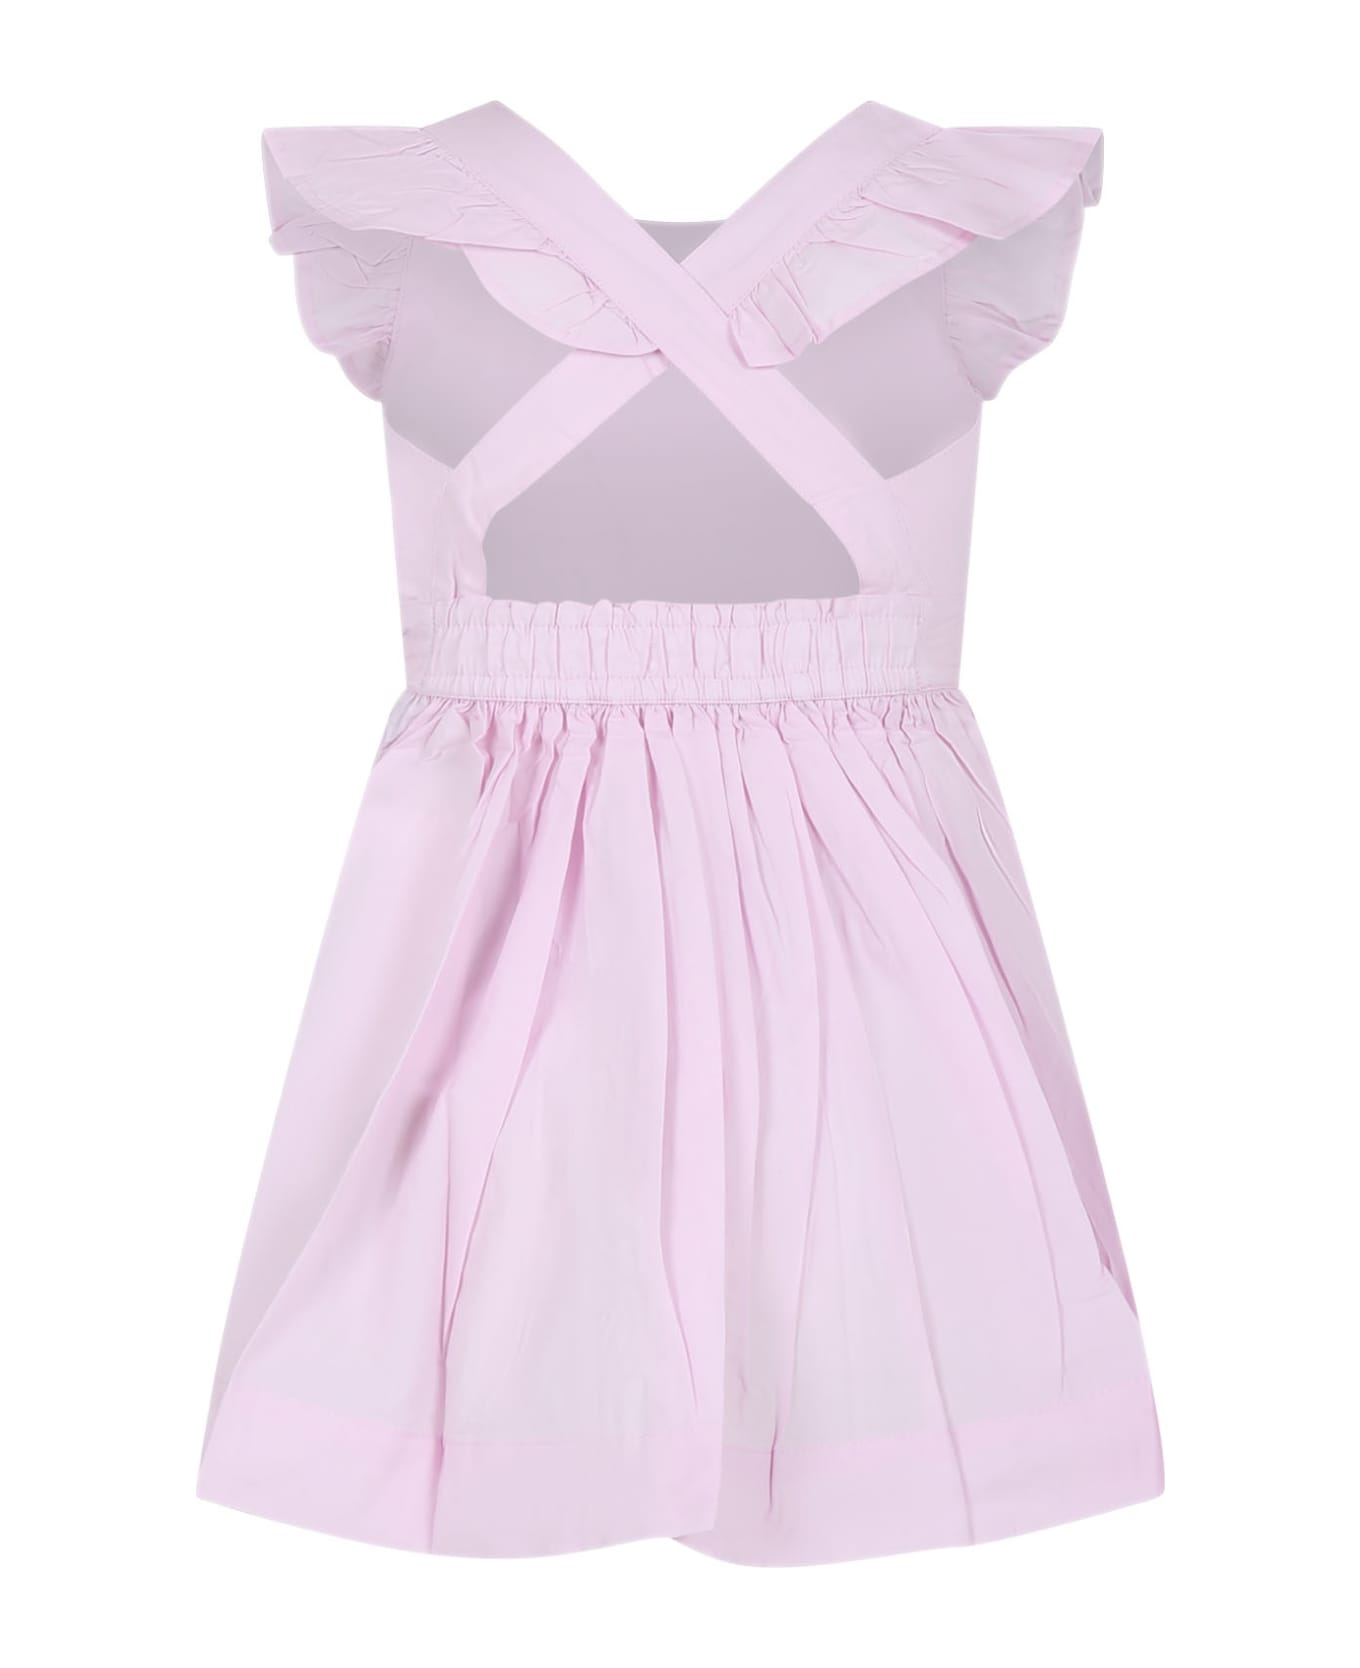 Molo Pink Dress For Girl - Pink